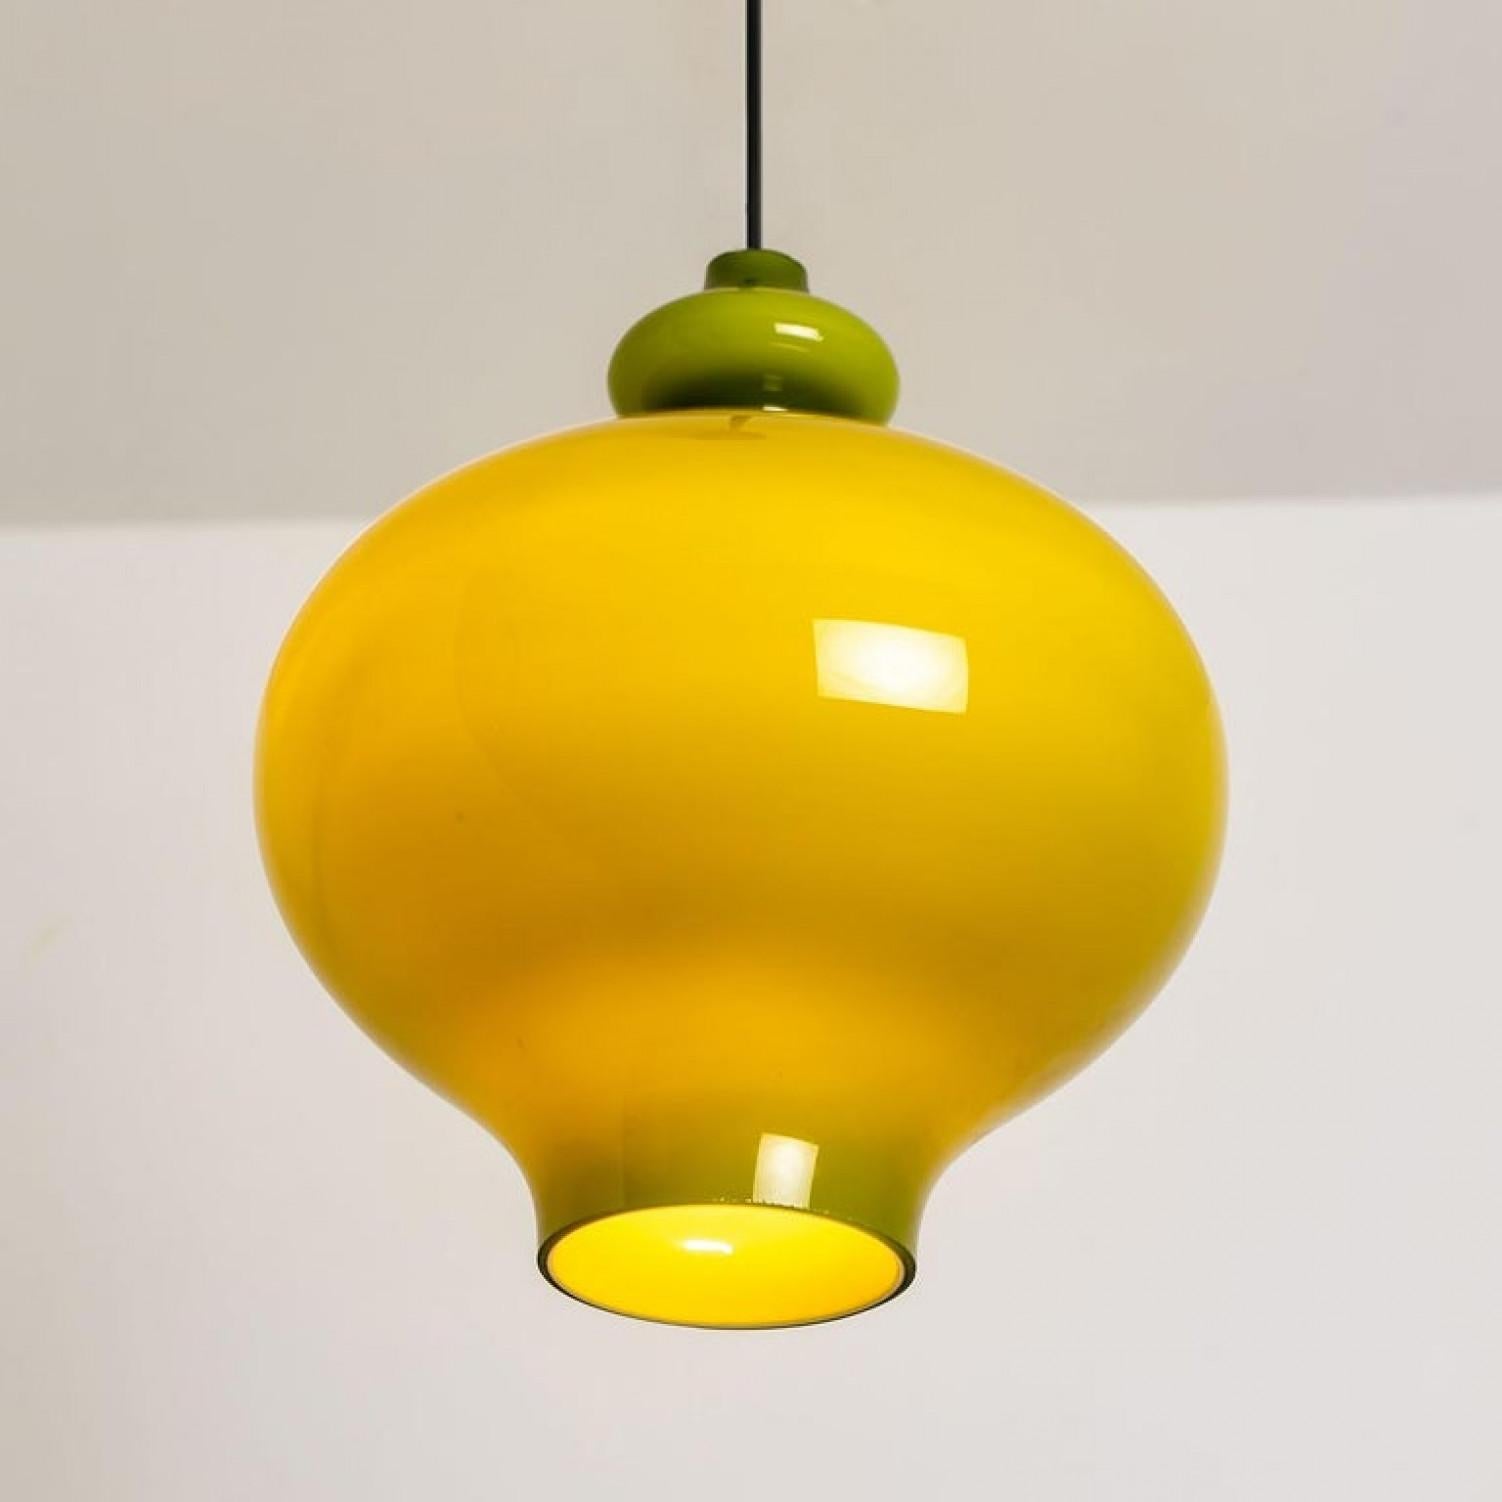 Pair of Hans-Agne Jakobsson for Staff Green Glass Pendant Lights, 1960 For Sale 3